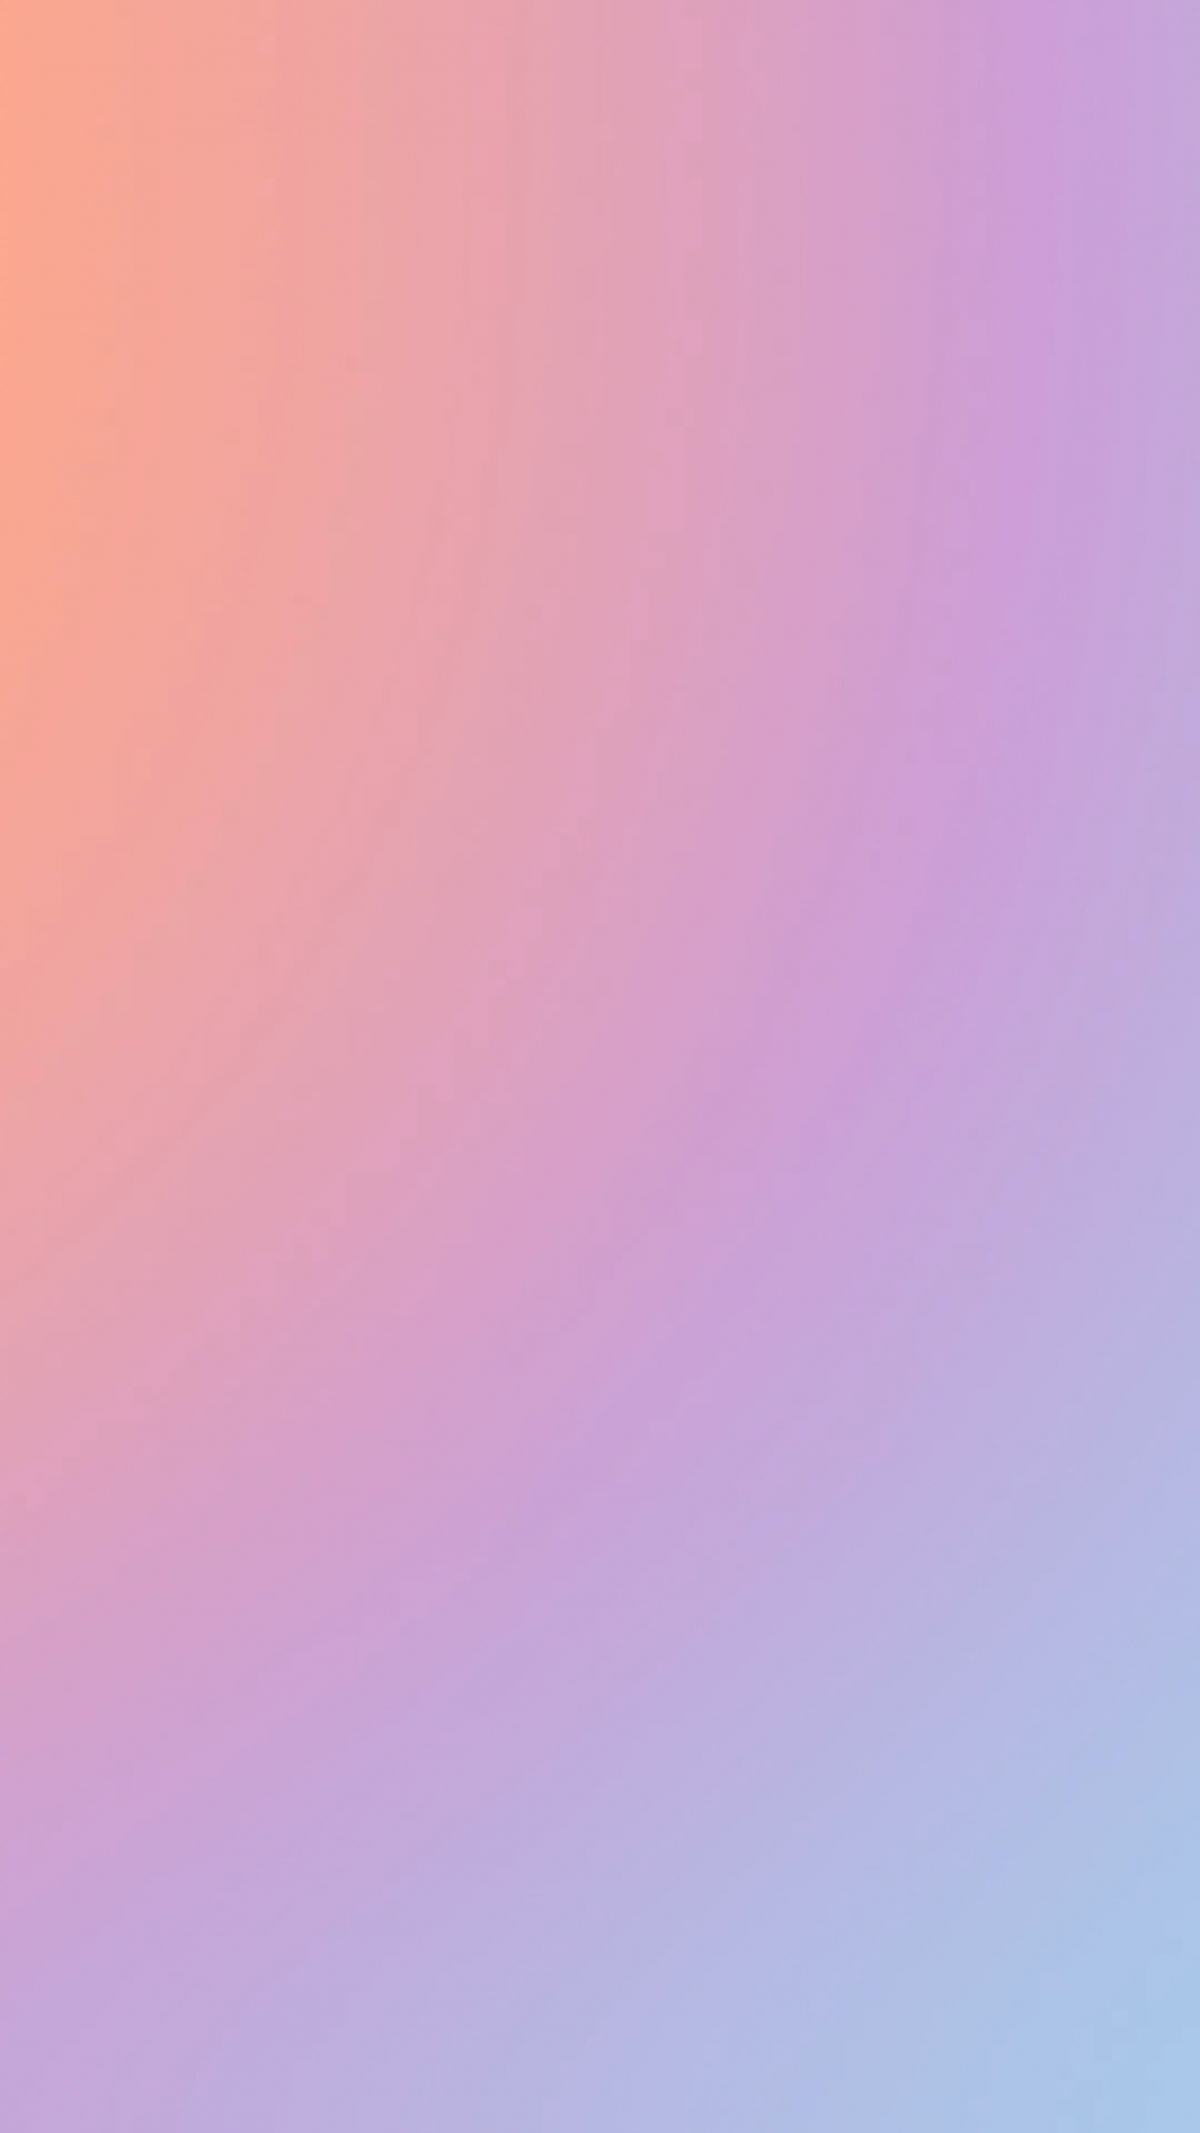 Gold & Blue Gradient wallpaper for Apple iPhone, Mac, iPad and more